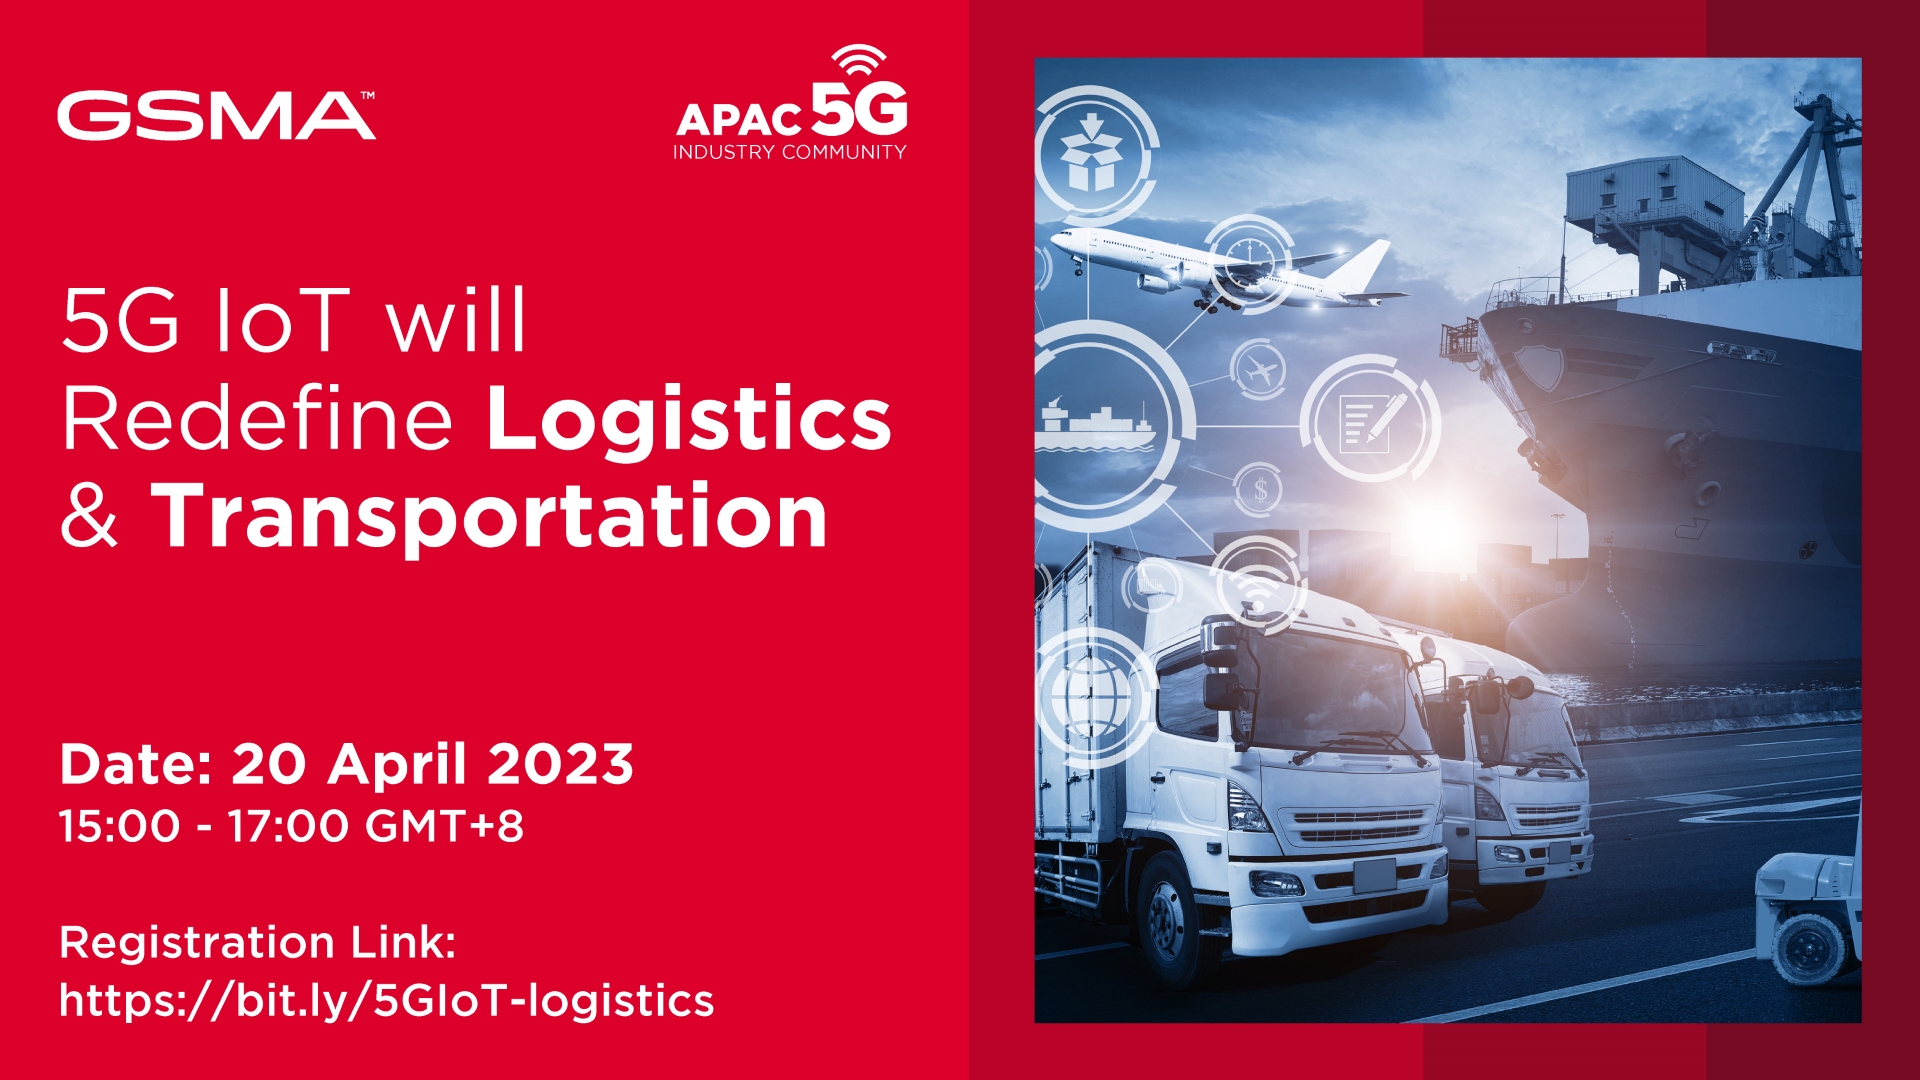 5G IoT will Redefine Logistics & Transportation – powered by APAC 5G Industry Community